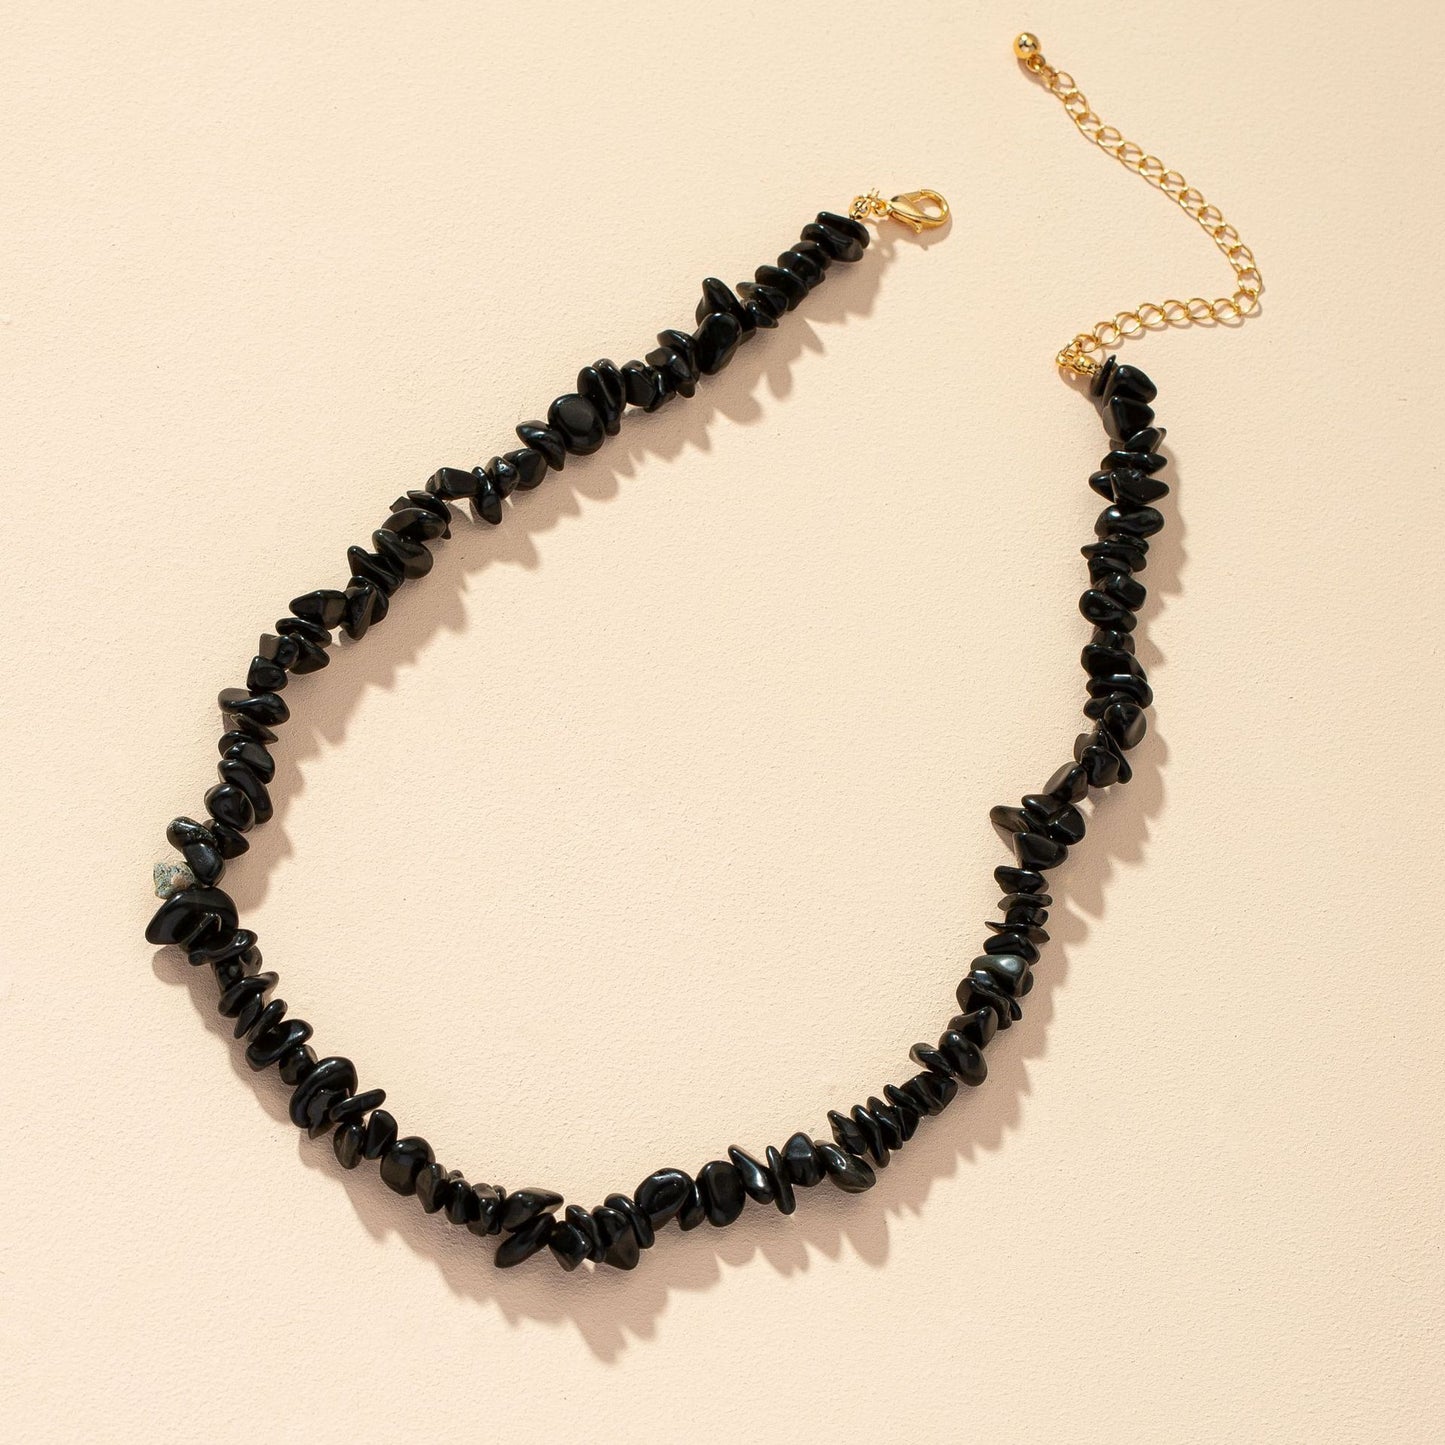 Trendy Black Geometric Necklace with Stone Pendant - Fashionable Sweater Chain